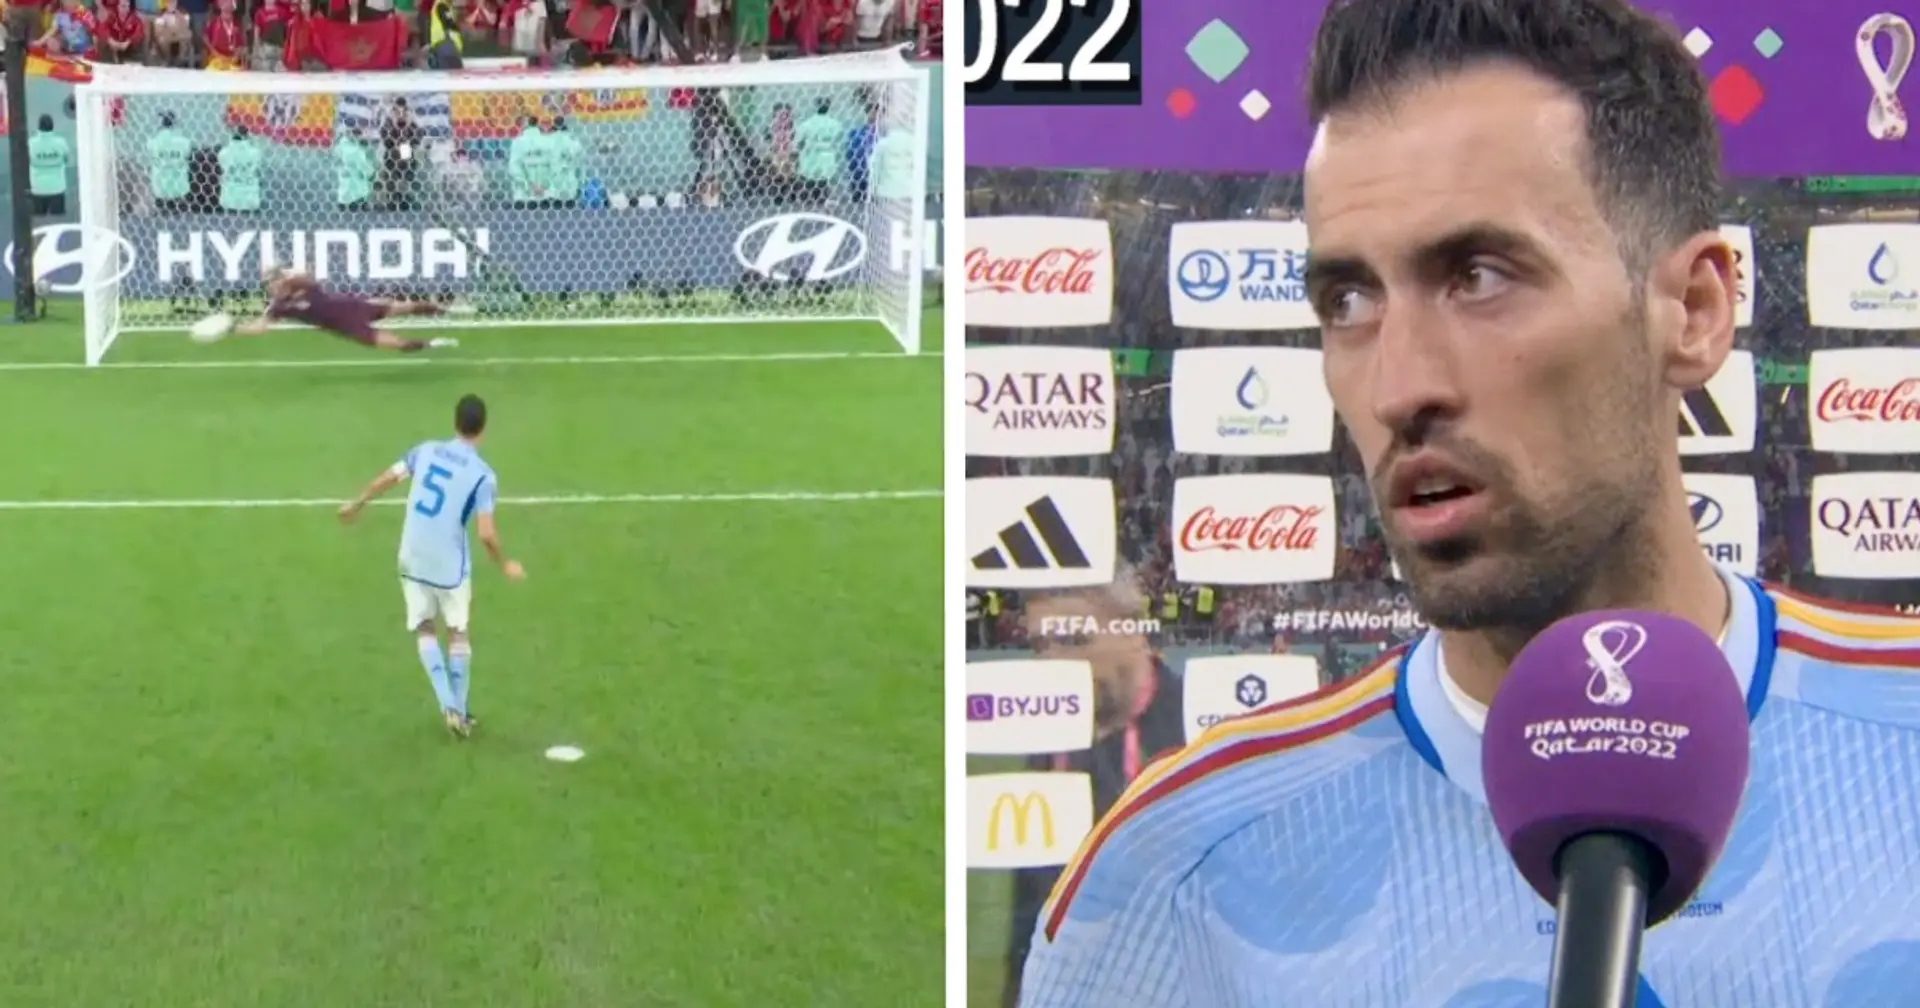 Busquets expected to make 'big decision' on his future after missing decisive penalty at World Cup